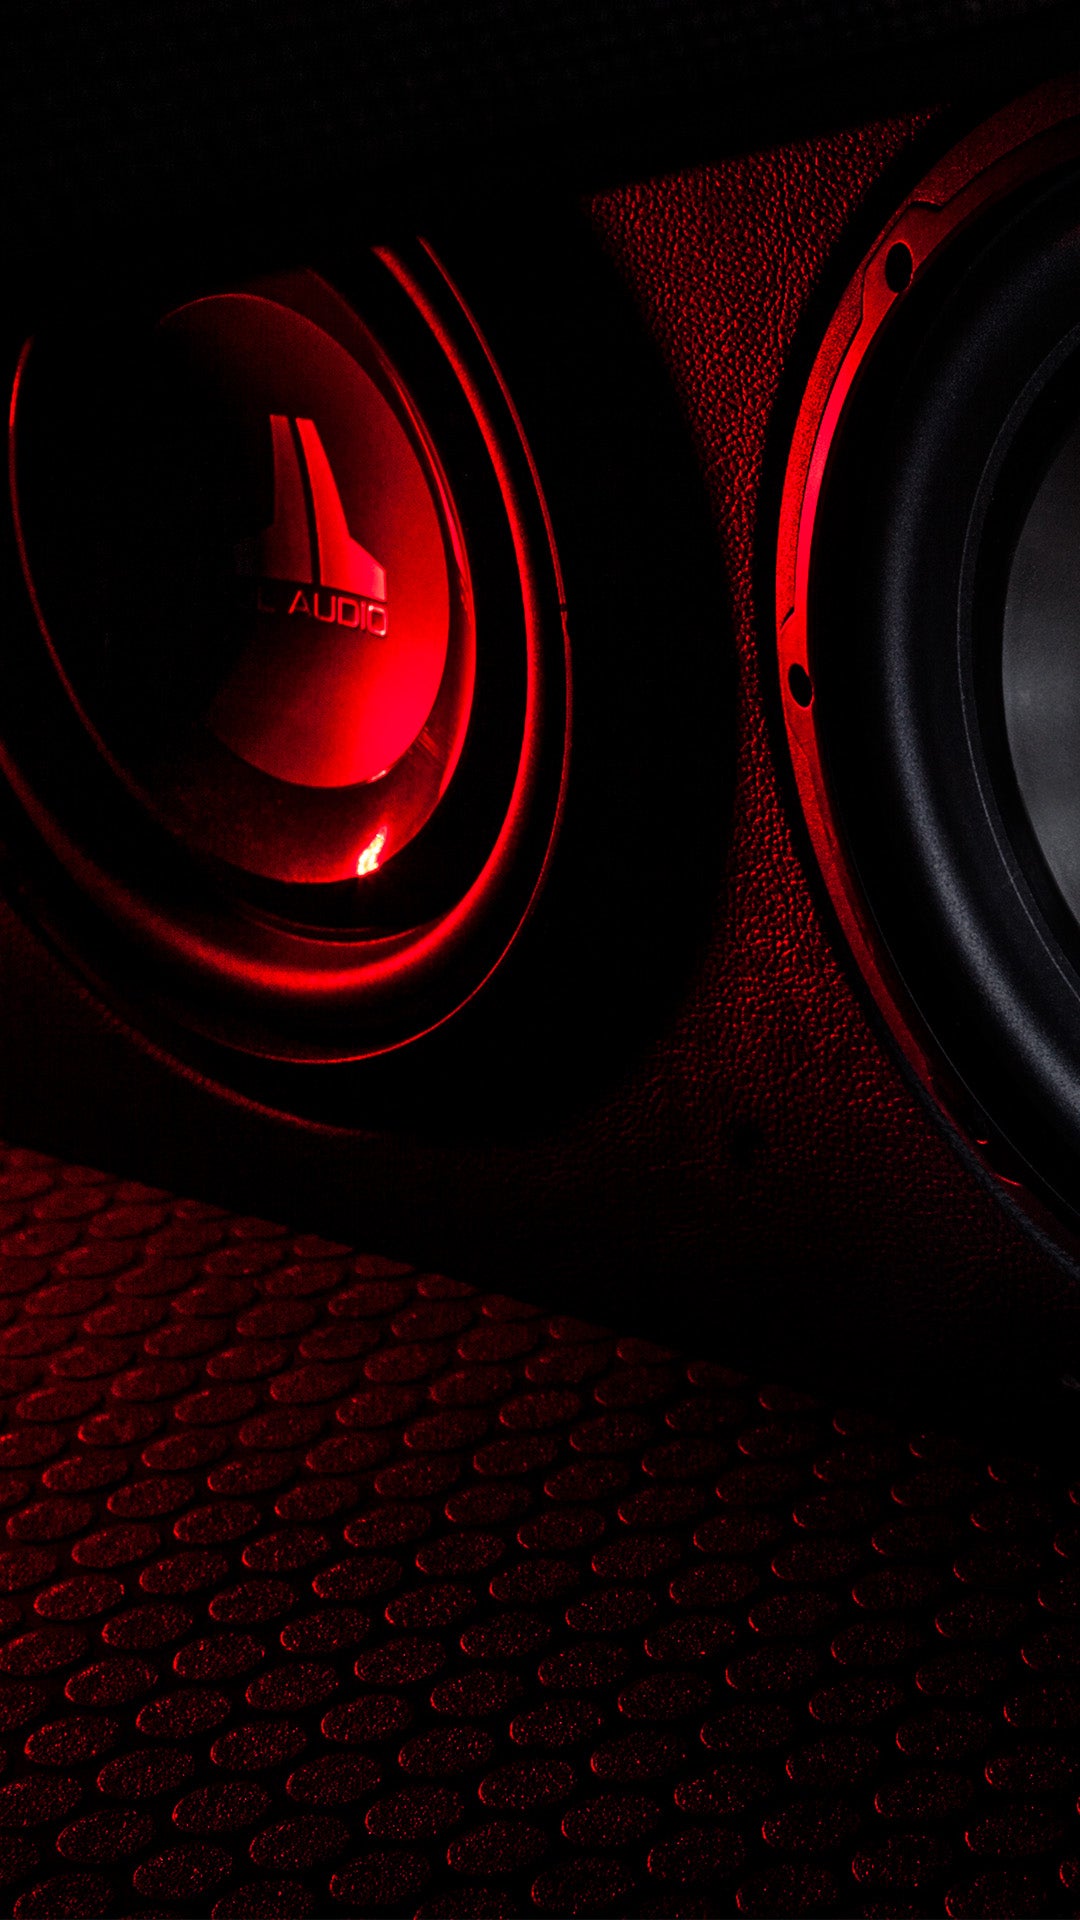 A pair of W1v3 subwoofer units in a truck with red LED lighting.